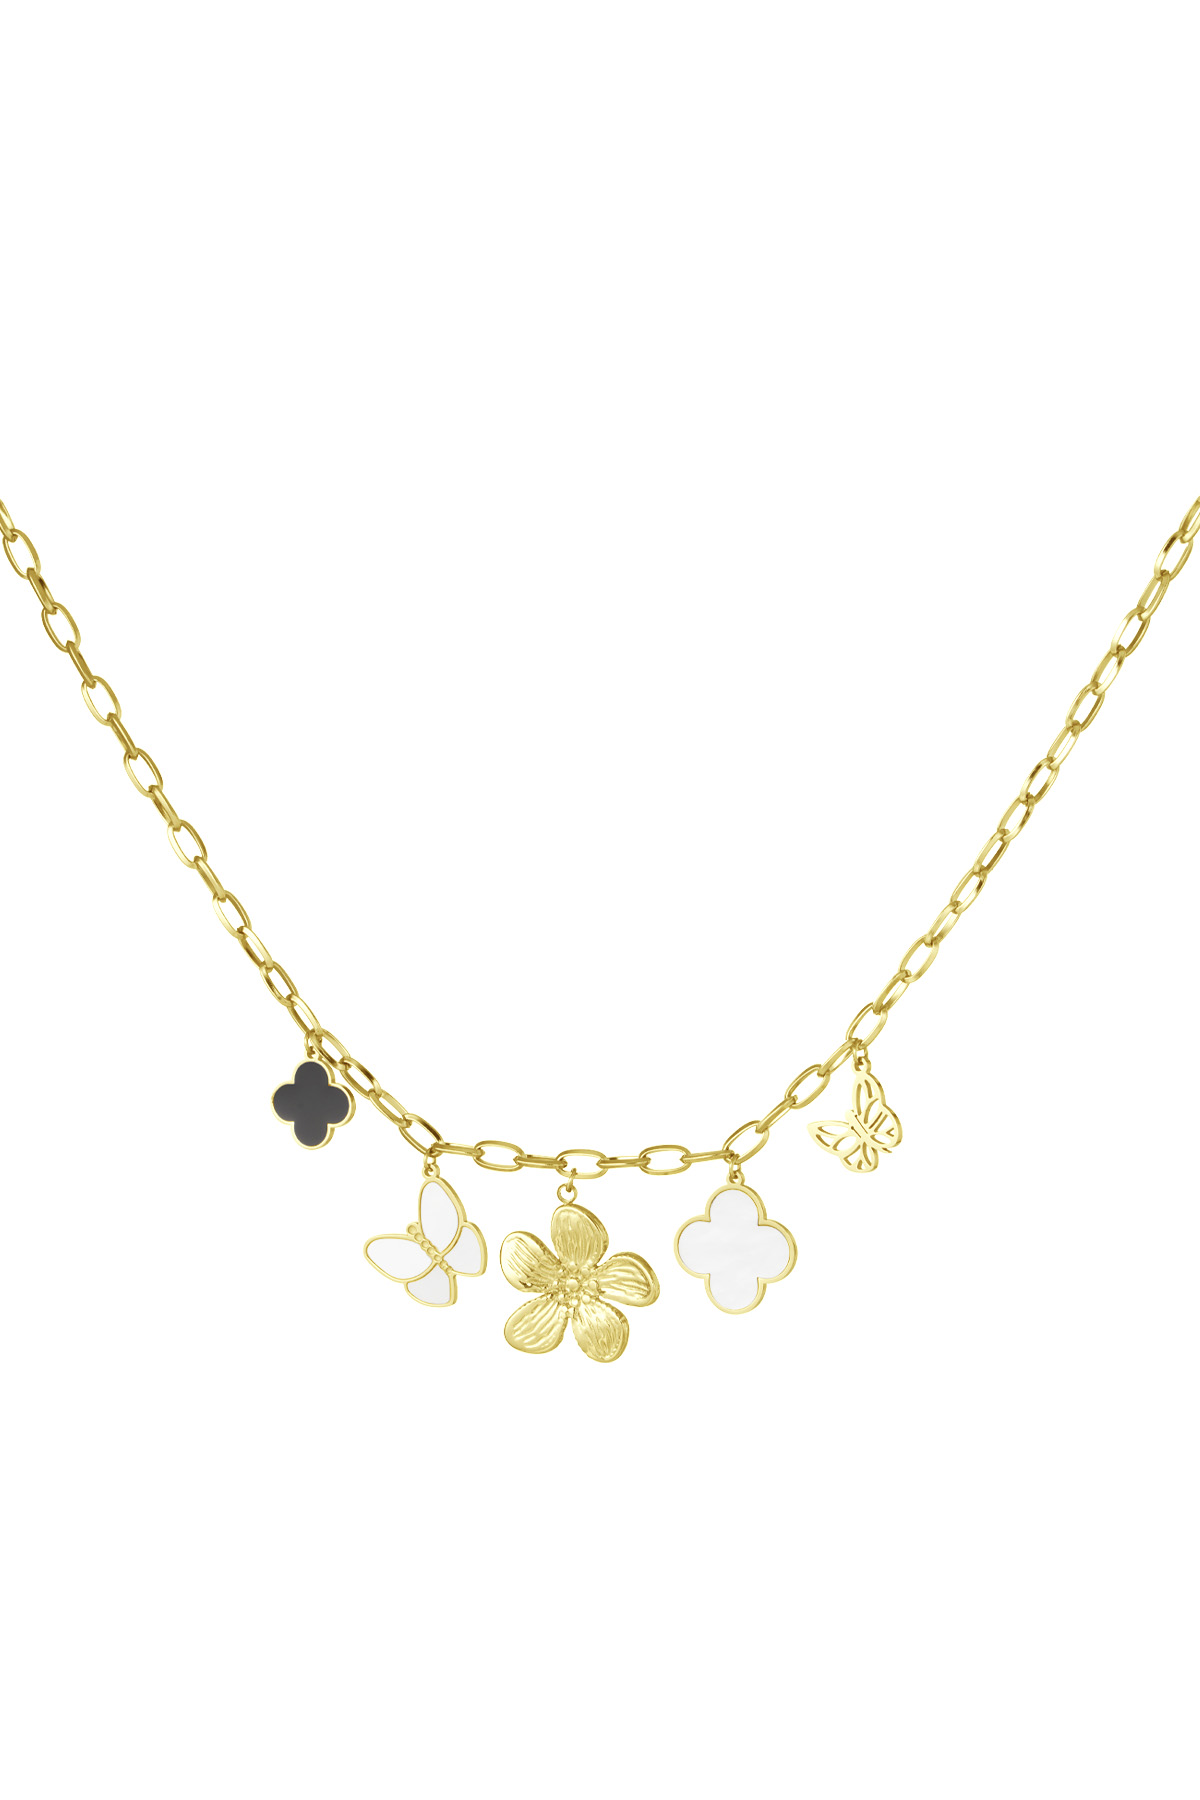 Charm necklace nature atmosphere - gold